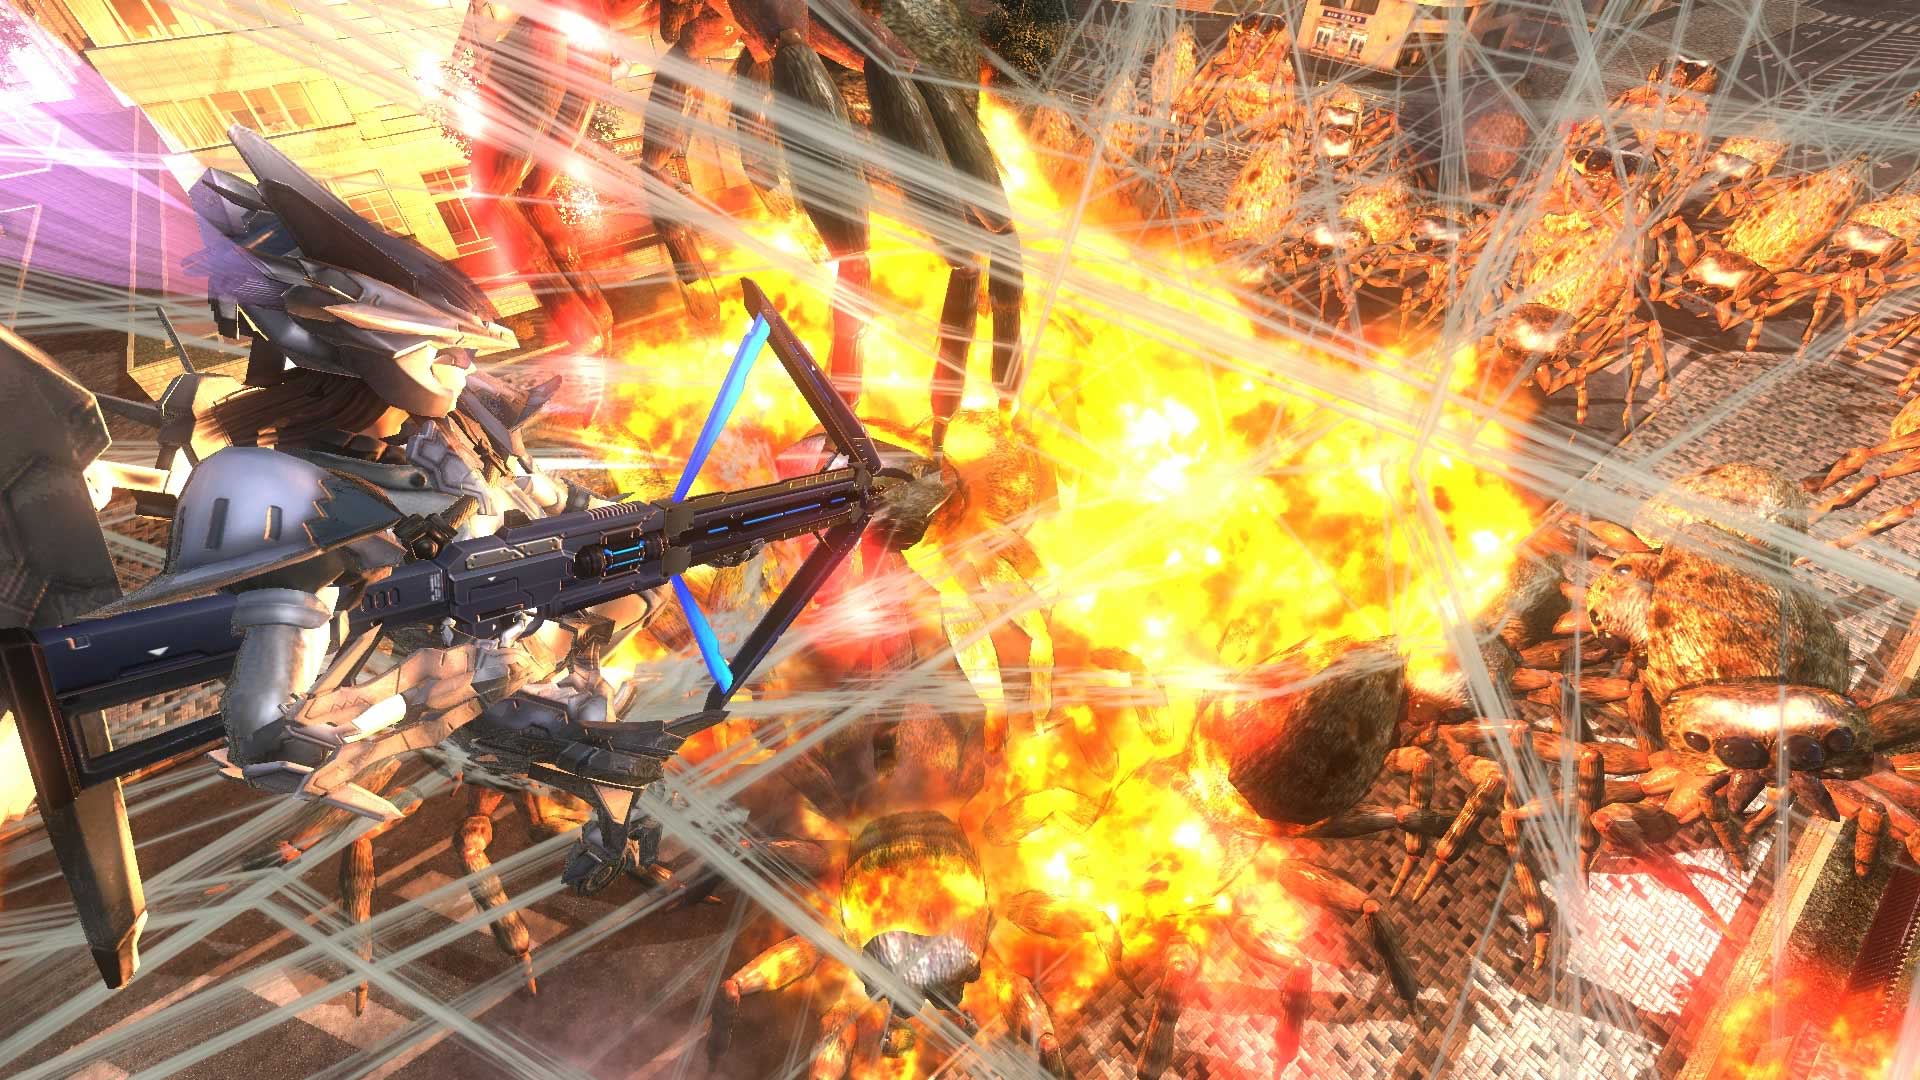 Earth Defense Force 4.1: The Shadow of New Despair spider screenshot